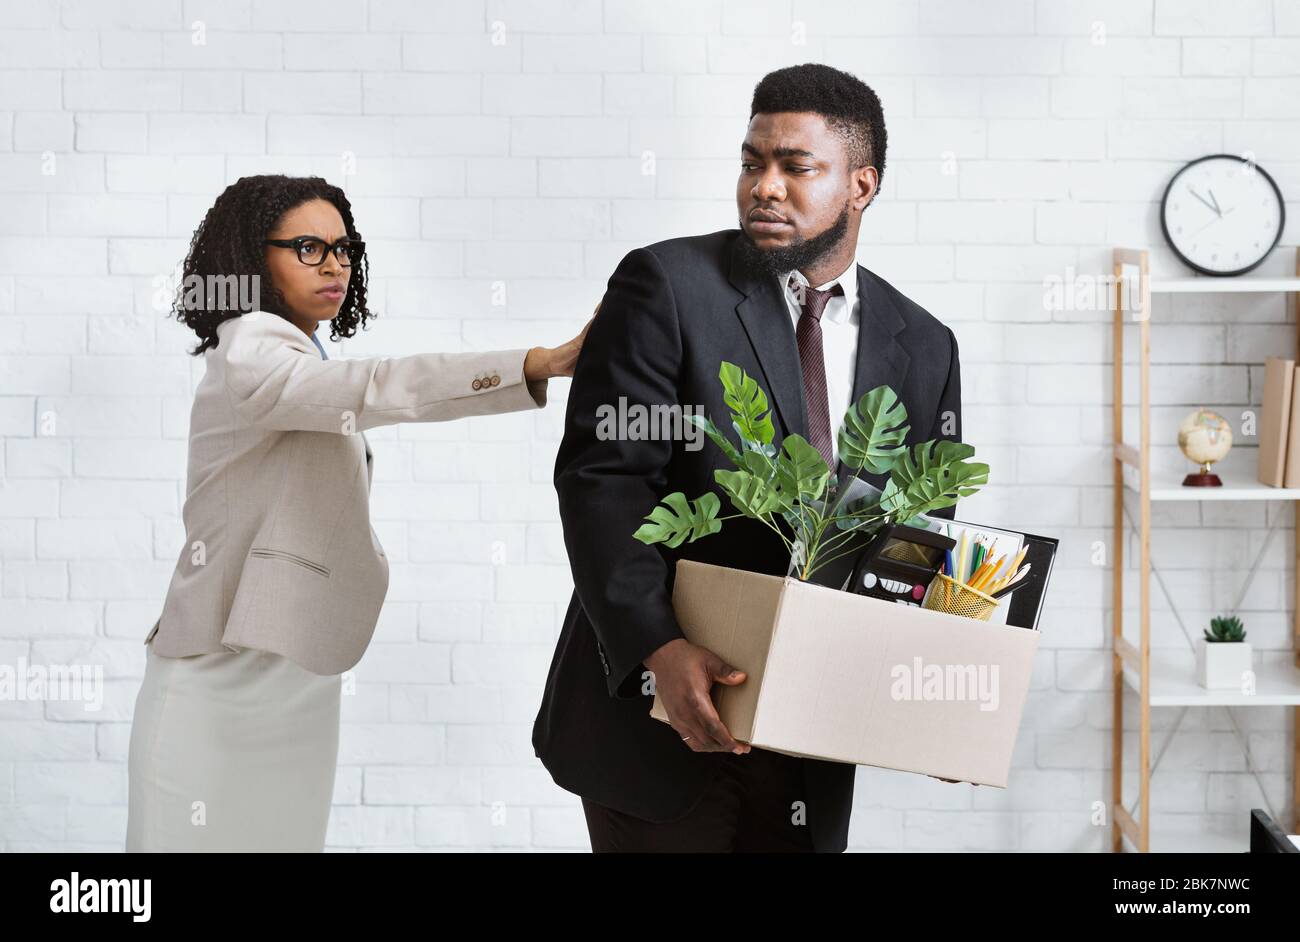 Job loss and unemployment. Female boss firing African American employee in office Stock Photo